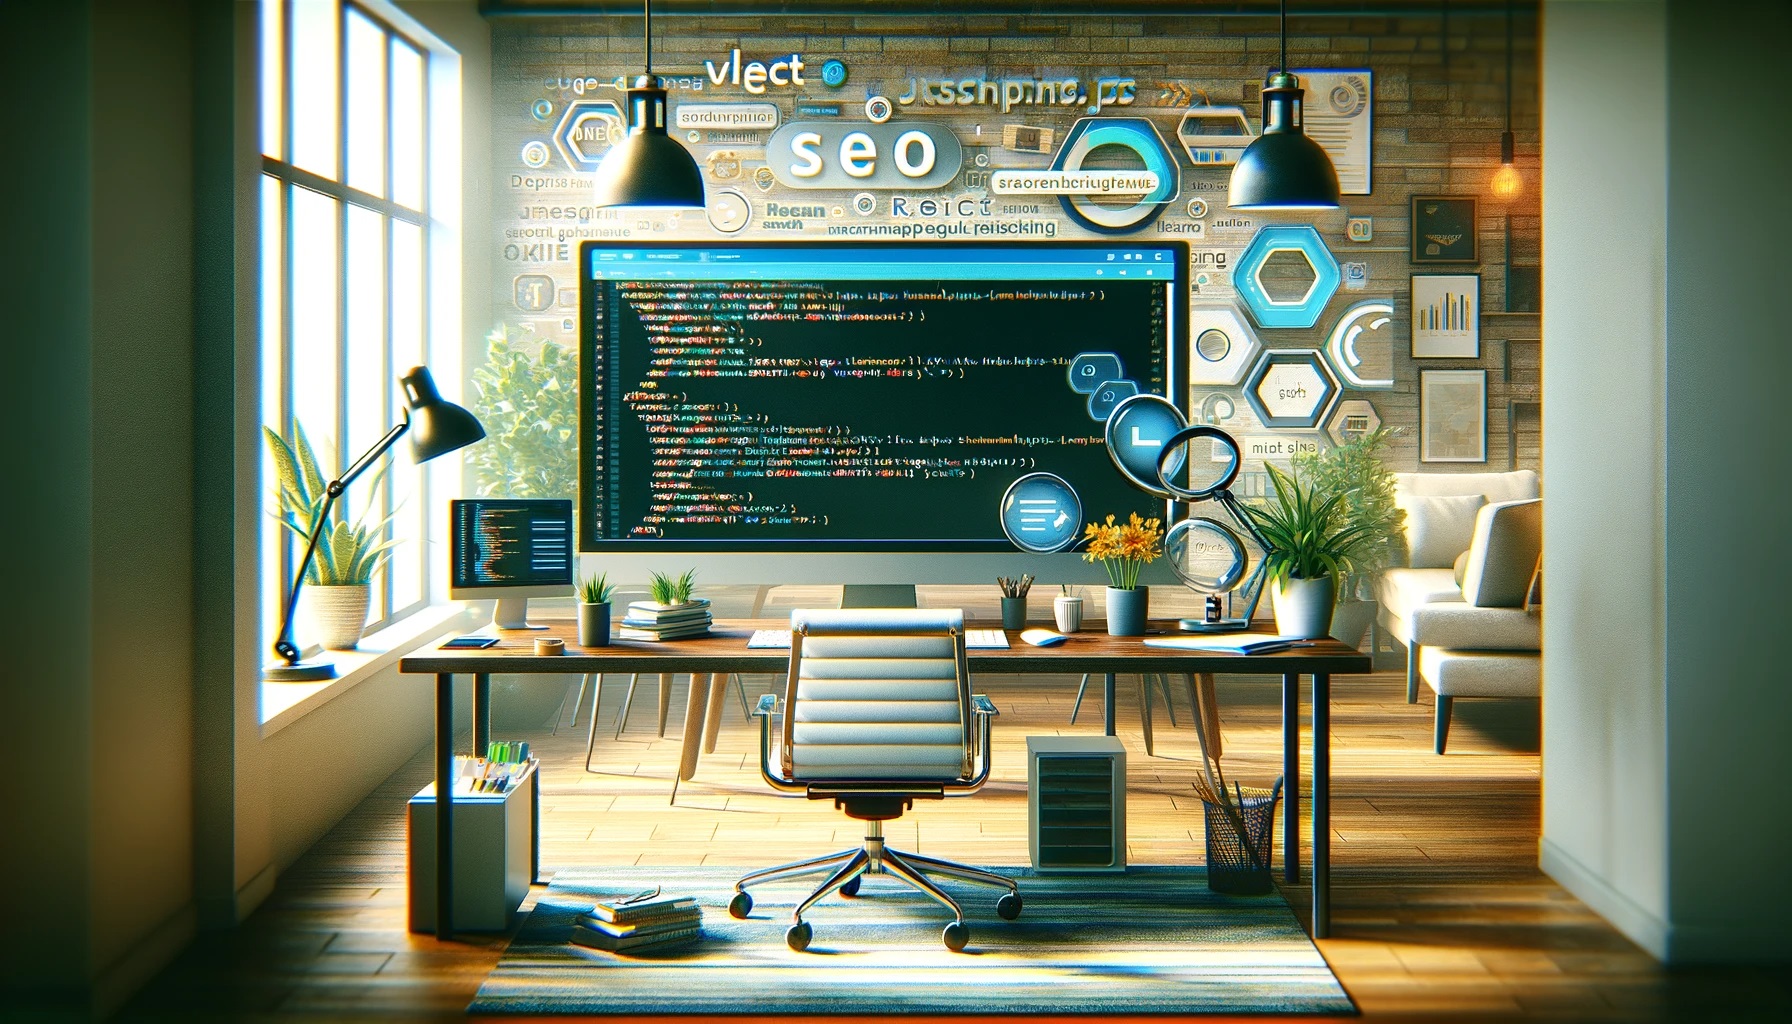 Modern home office with a computer displaying code on the screen, SEO-themed wall decorations, and a cozy sitting area, illustrating a productive workspace for SEO and web development.